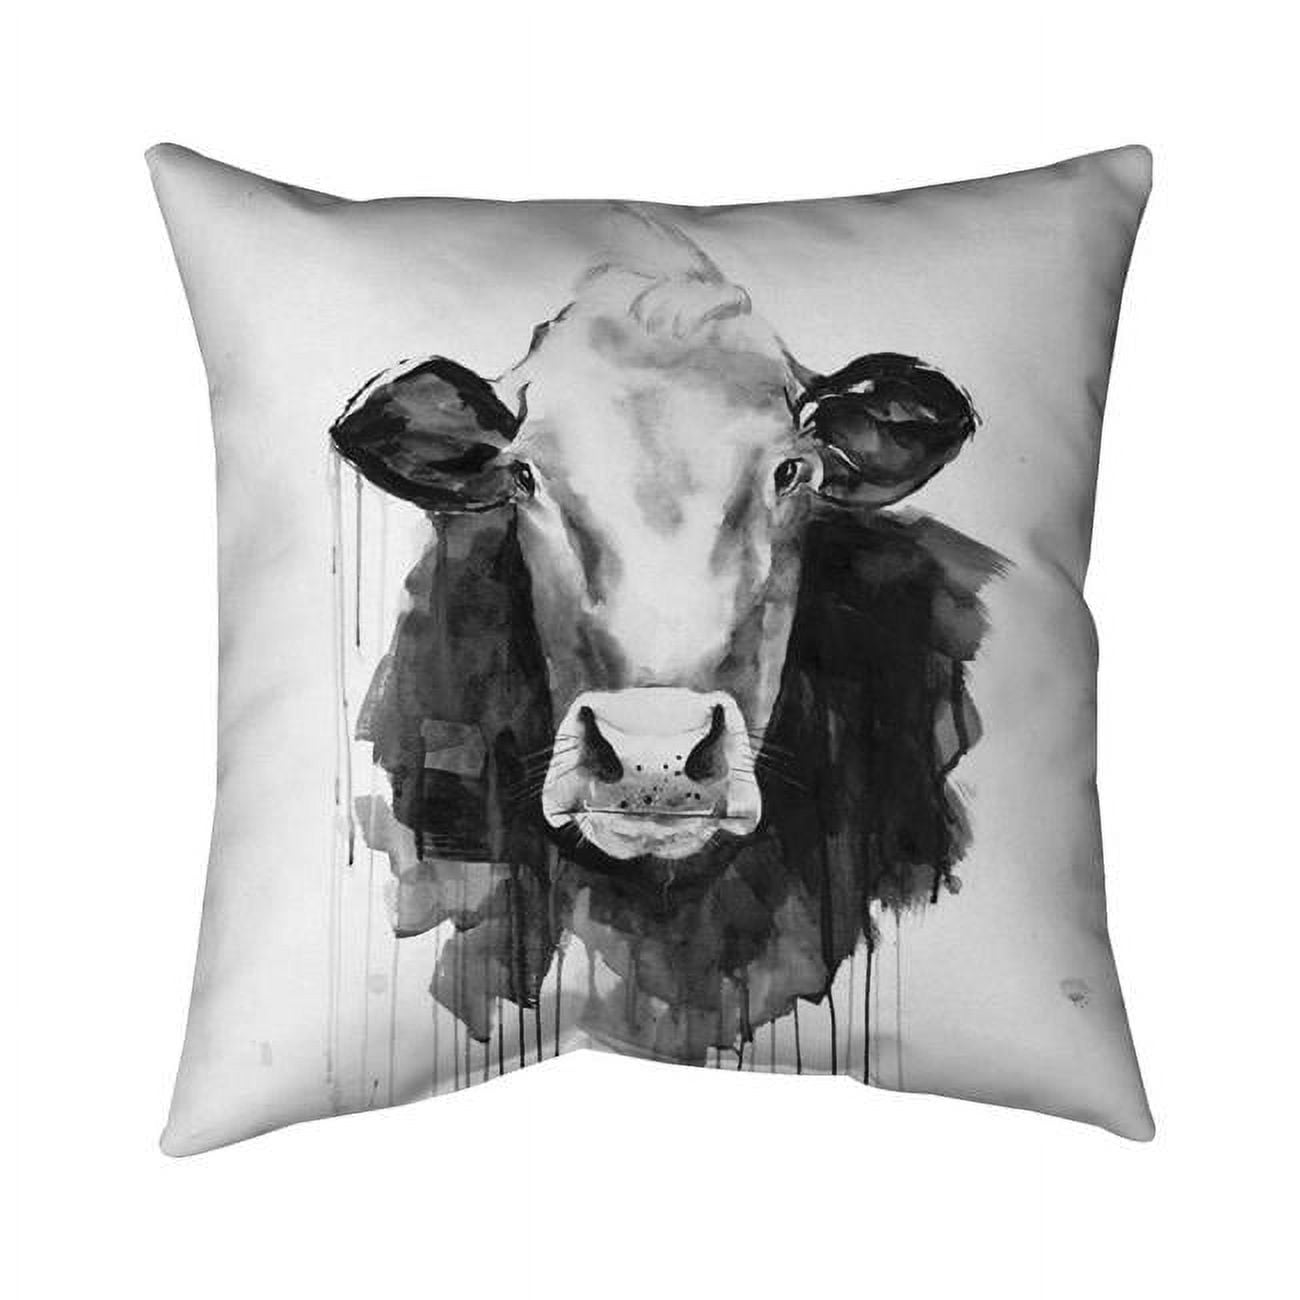 Begin Home Decor 5543-2020-AN370-1 20 x 20 in. Cow-Double Sided Print Indoor Pillow Cover